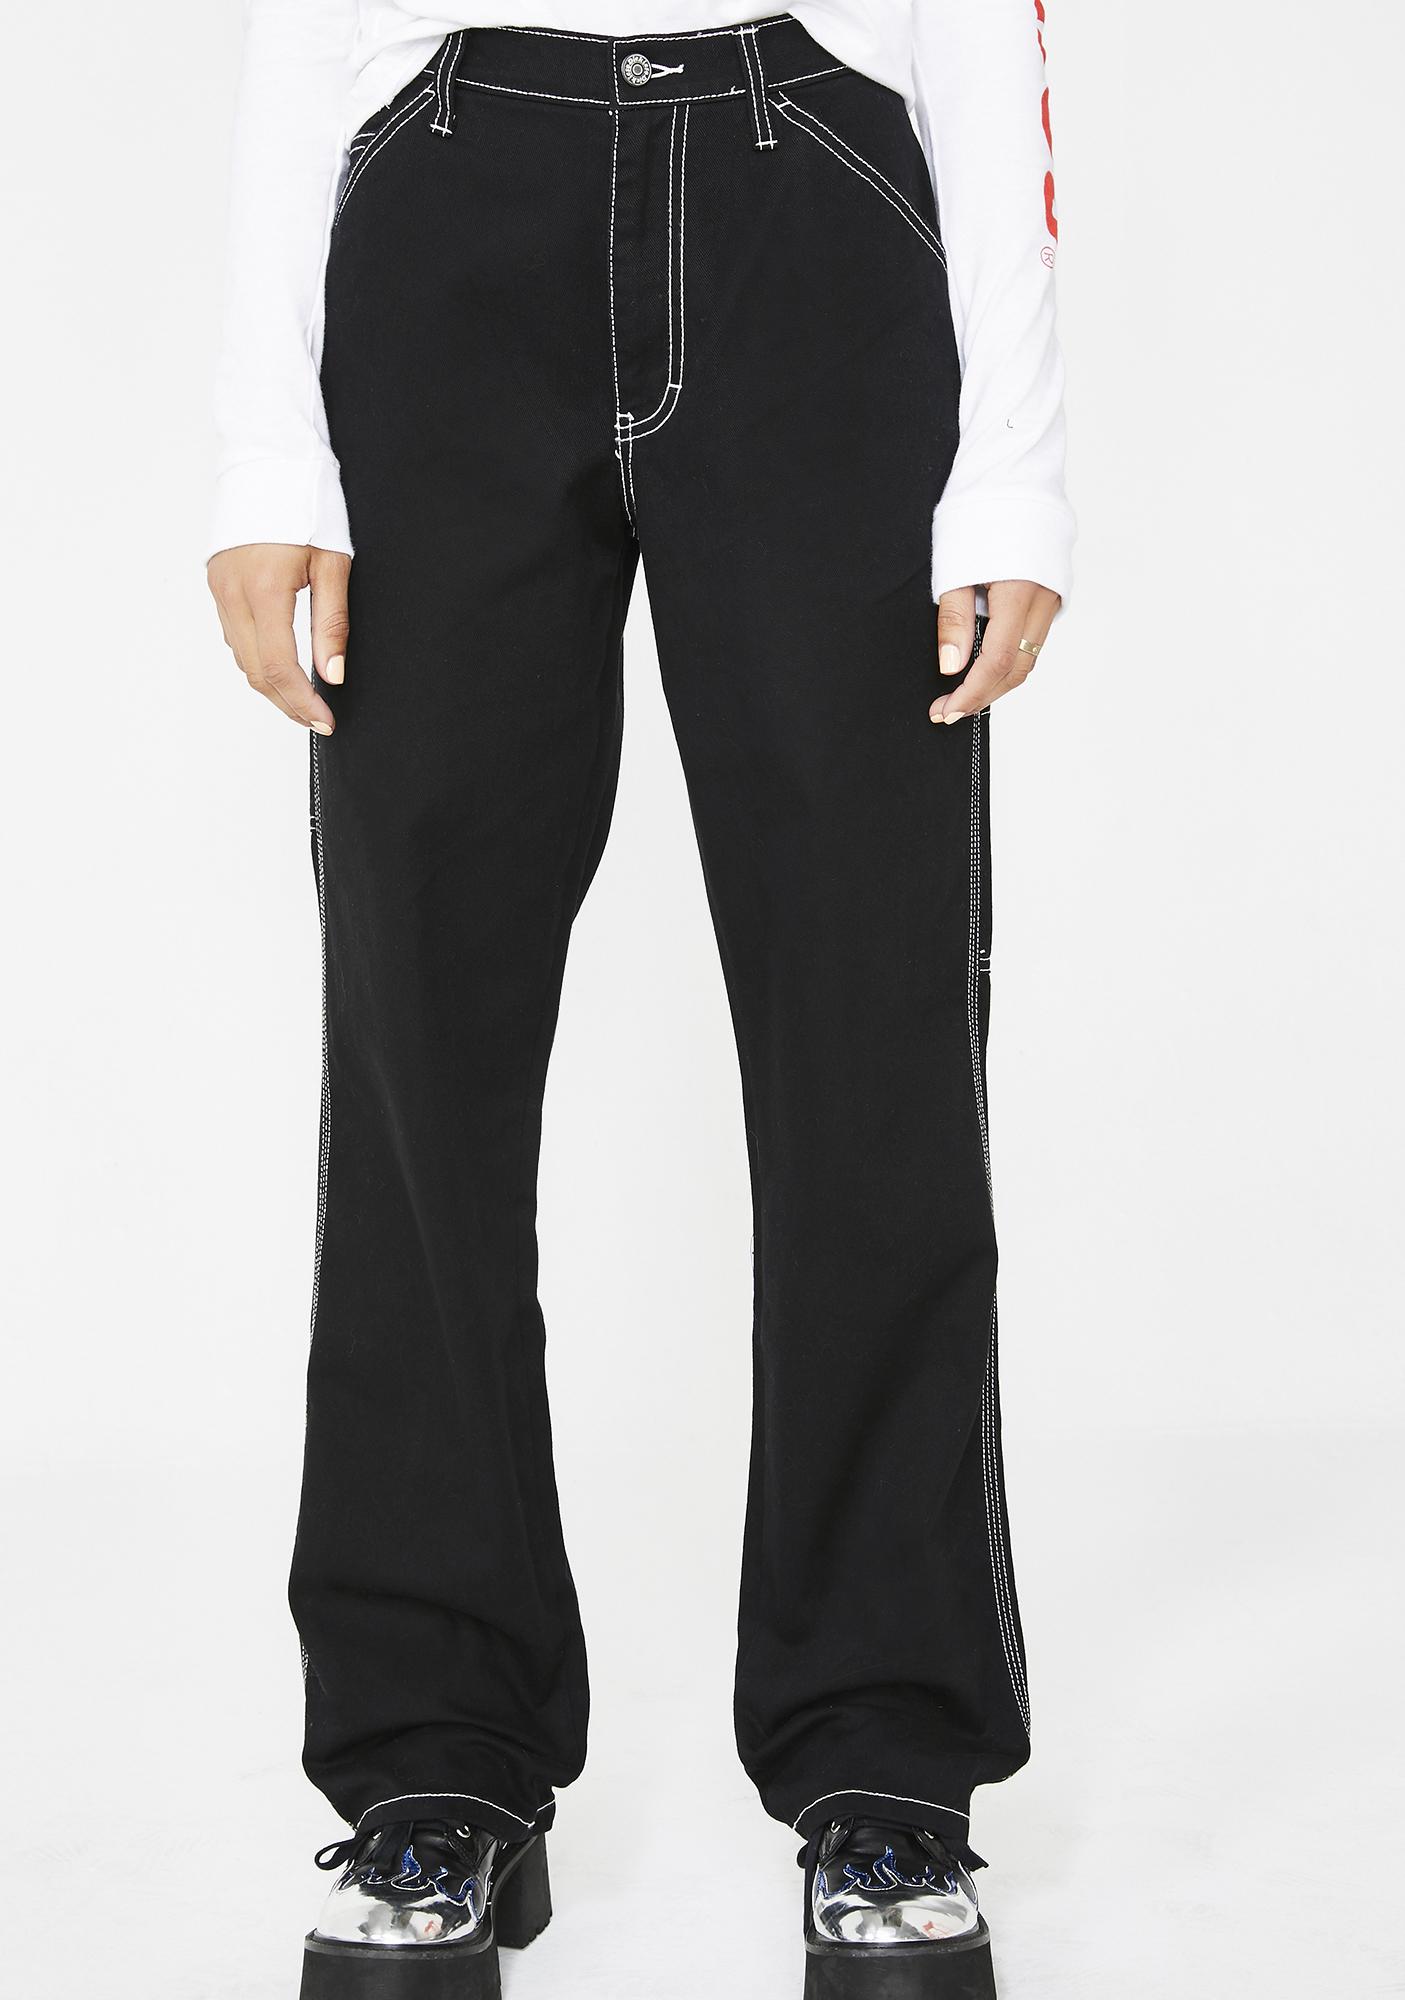 dickies black carpenter pants with white contrast stitching